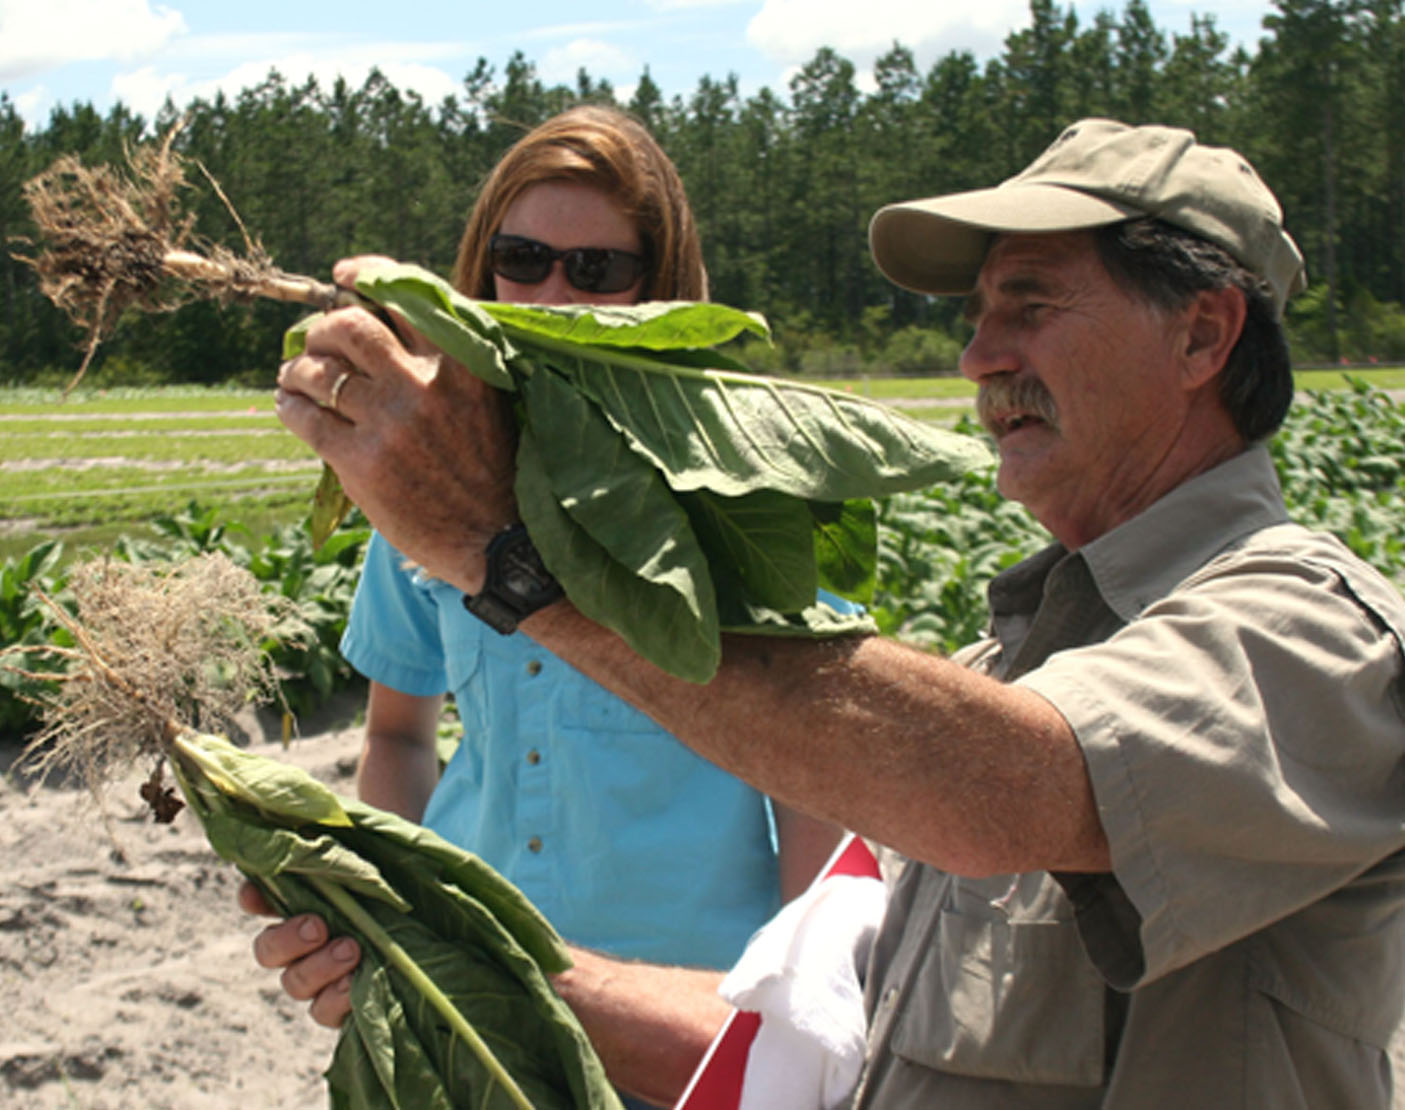 Alex Csinos, a University of Georgia scientist based in Tifton, holds up a pair of tobacco plants during a tobacco tour on the UGA Tifton Campus on June 10, 2014. Csinos shows nematode damage on a tobacco plant.